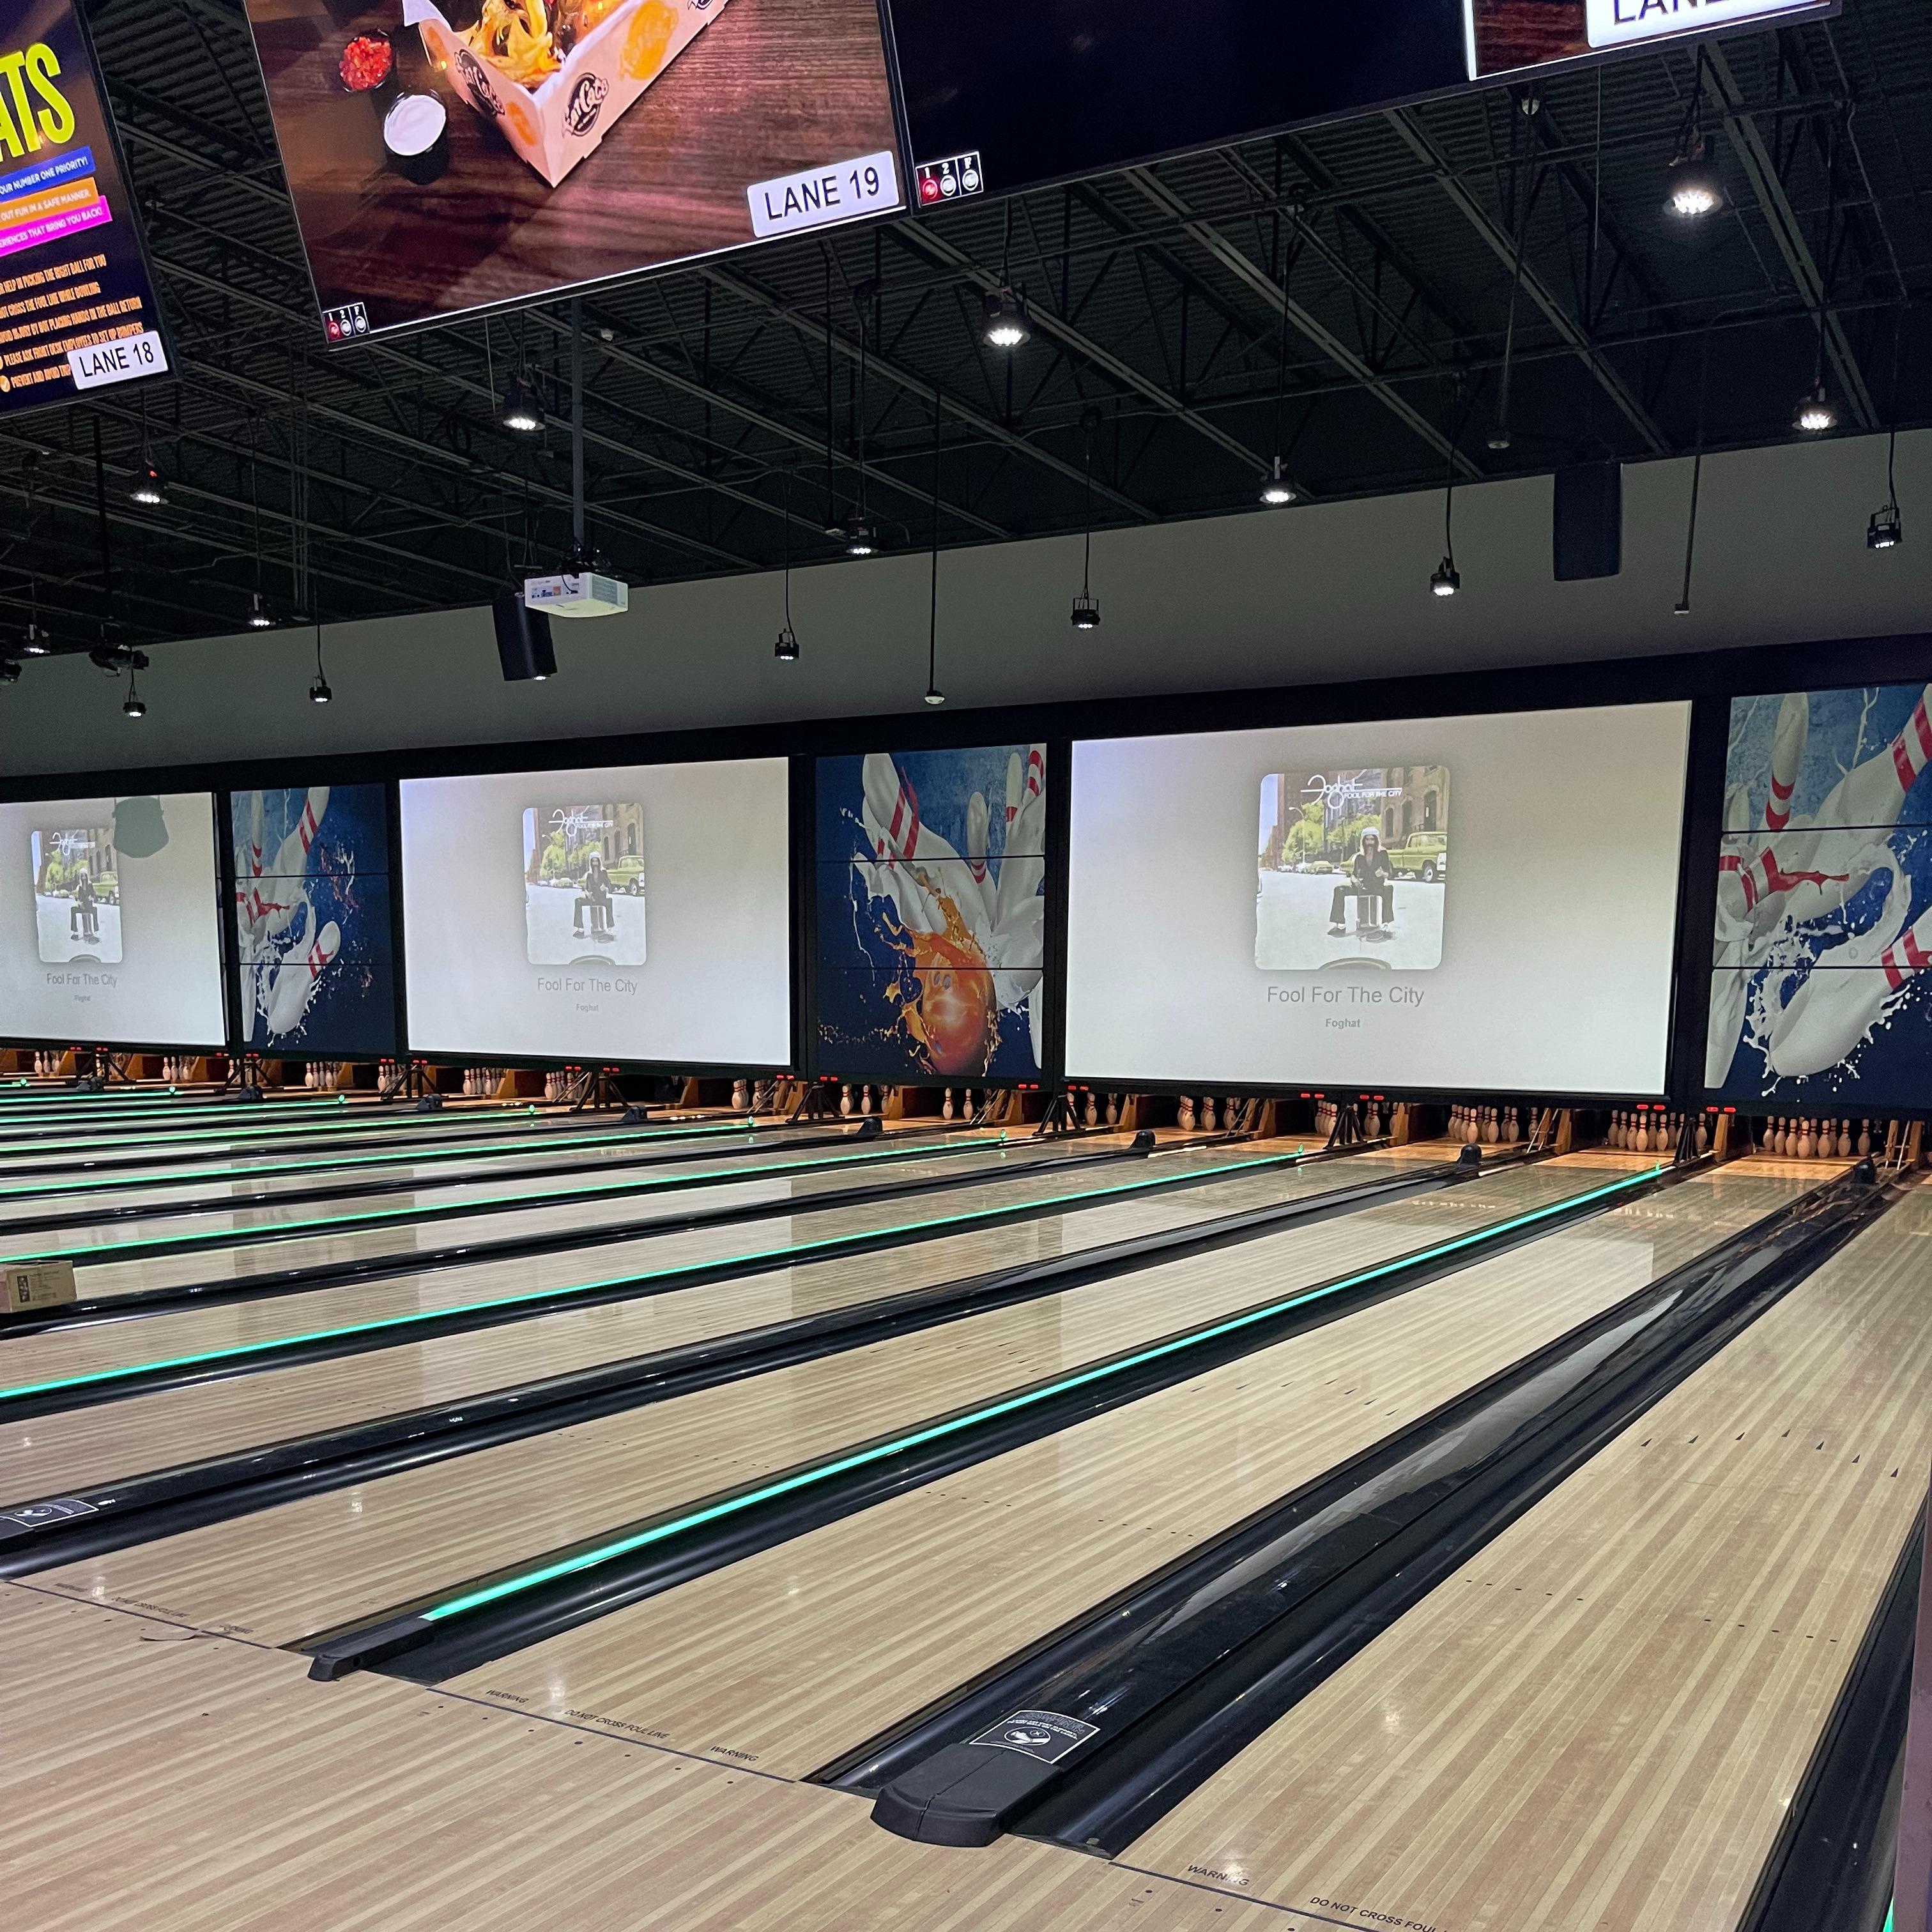 There will also be twenty lanes of modern recreational bowling, complete with special lighting, large projector screens, and optional gaming experiences.